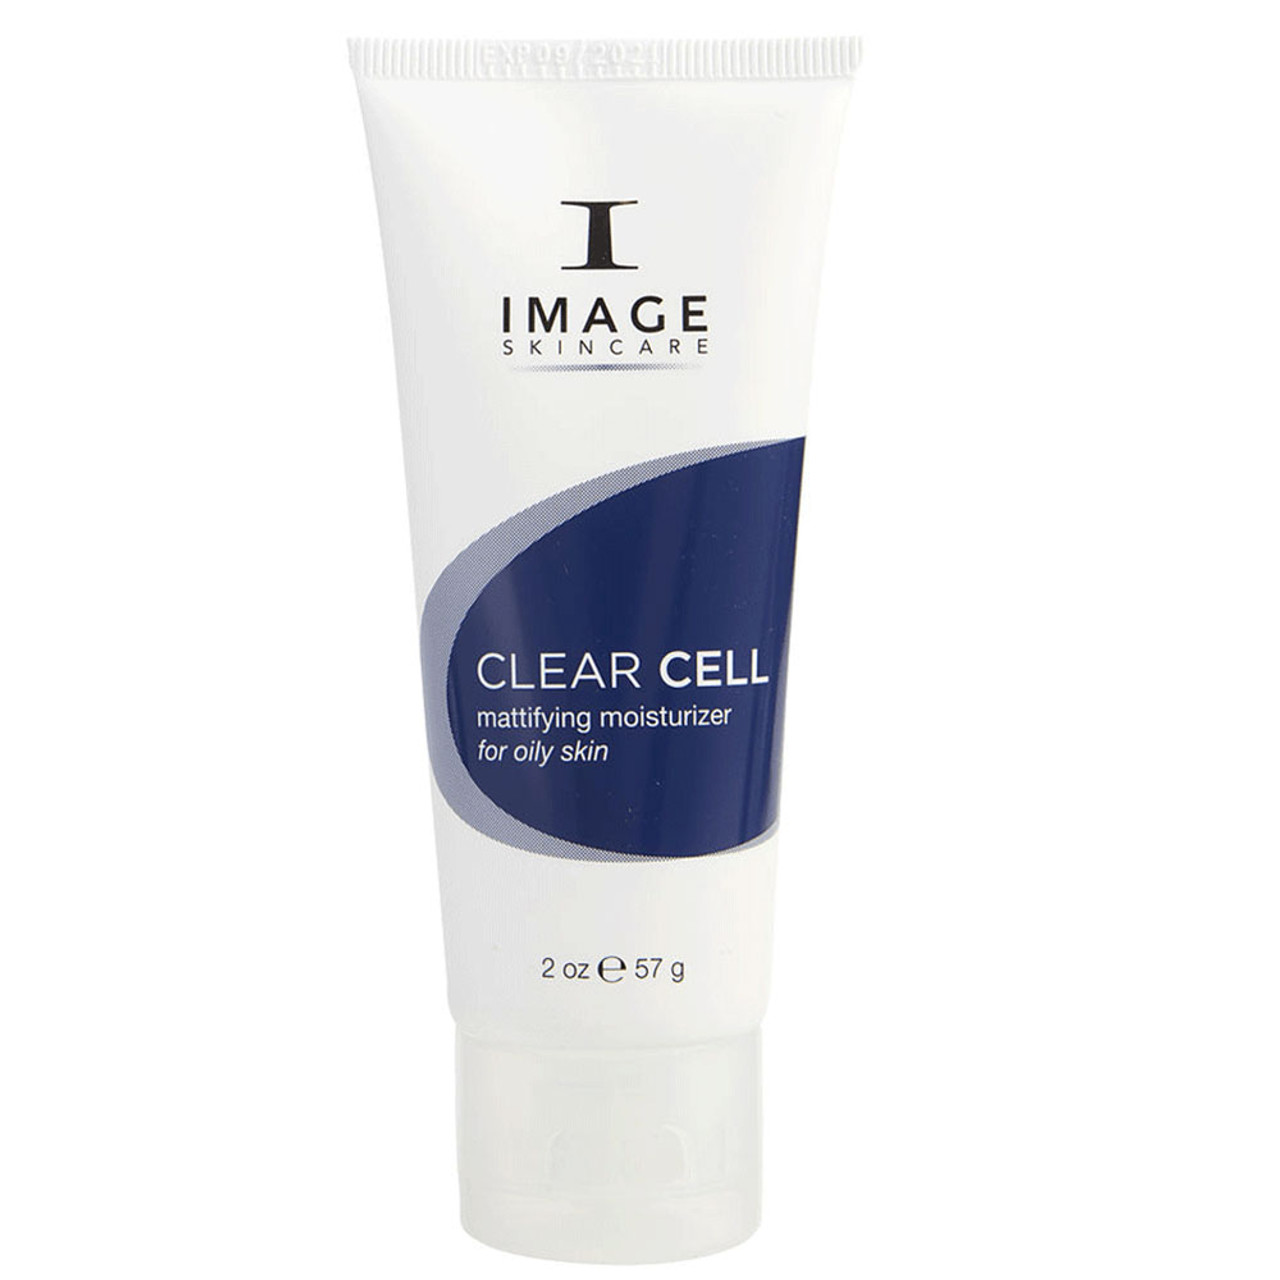 IMAGE Skincare CLEAR CELL Mattifying Moisturizer for Oily Skin BeautifiedYou.com